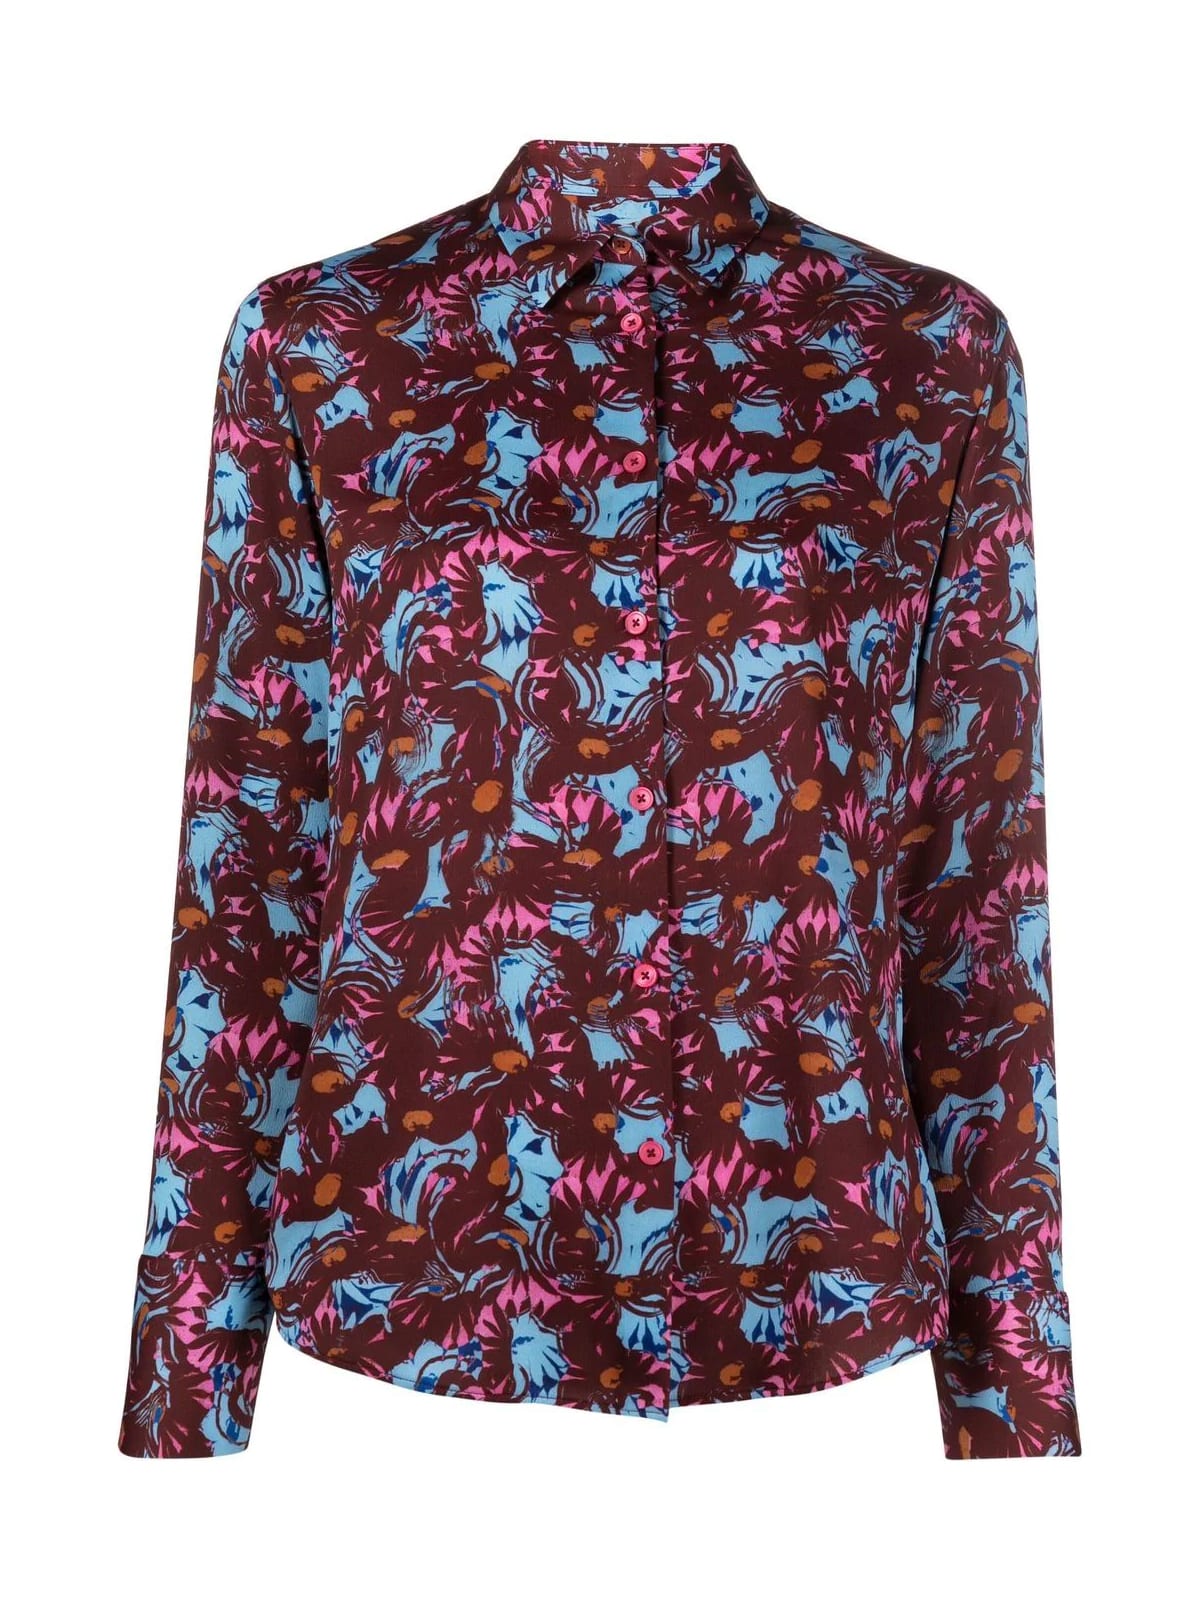 PS by Paul Smith Womens Shirt